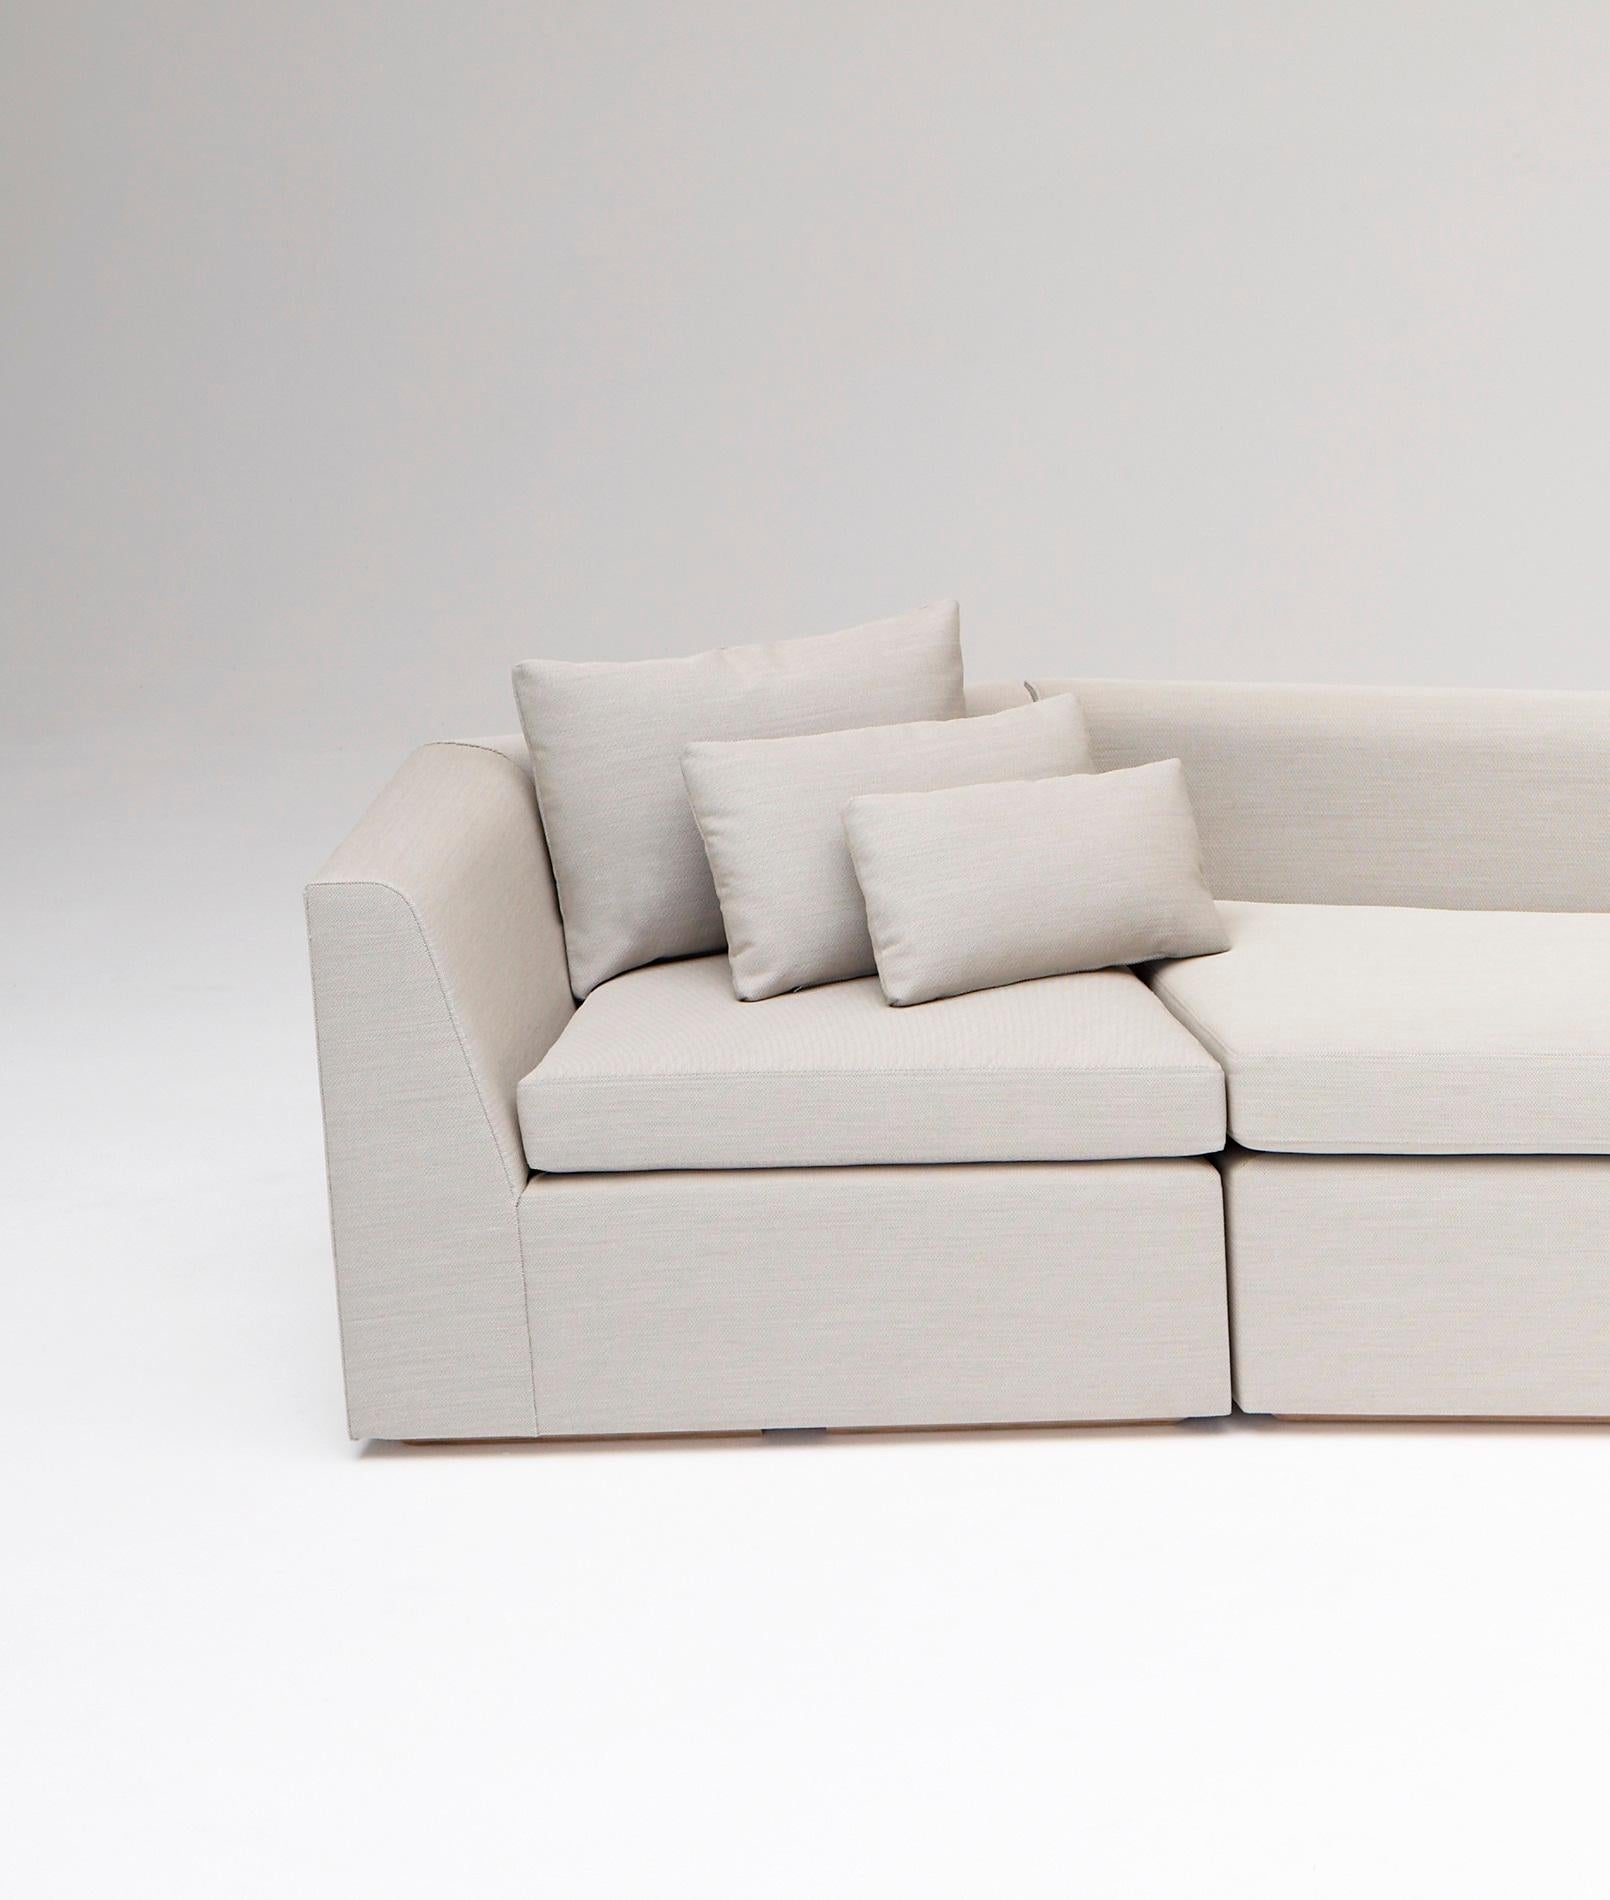 Other Pangaea Sofa by Phase Design For Sale